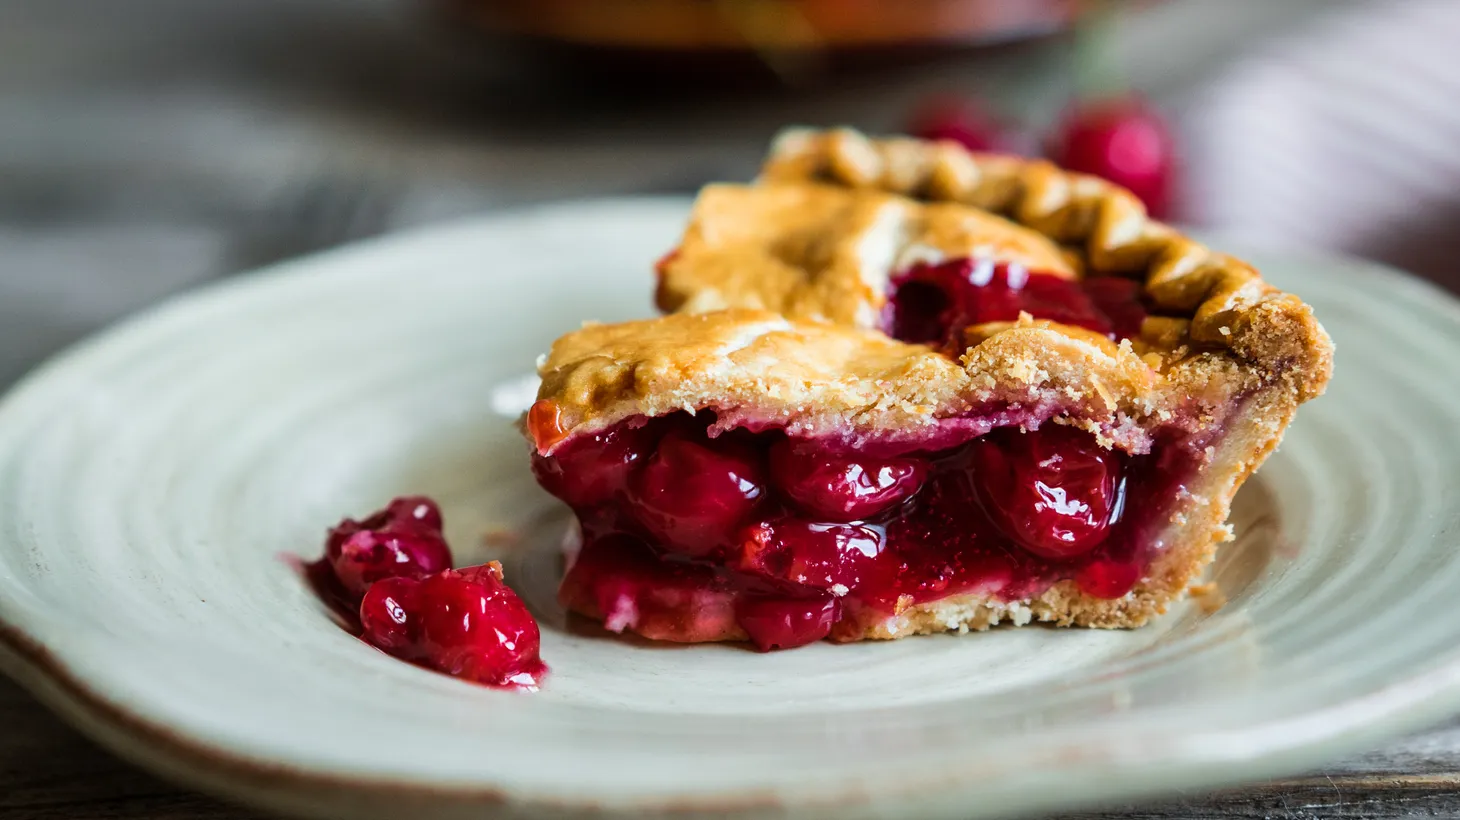 The sour cherry pie is a rarity in Southern California as the season for sour cherries is brief.